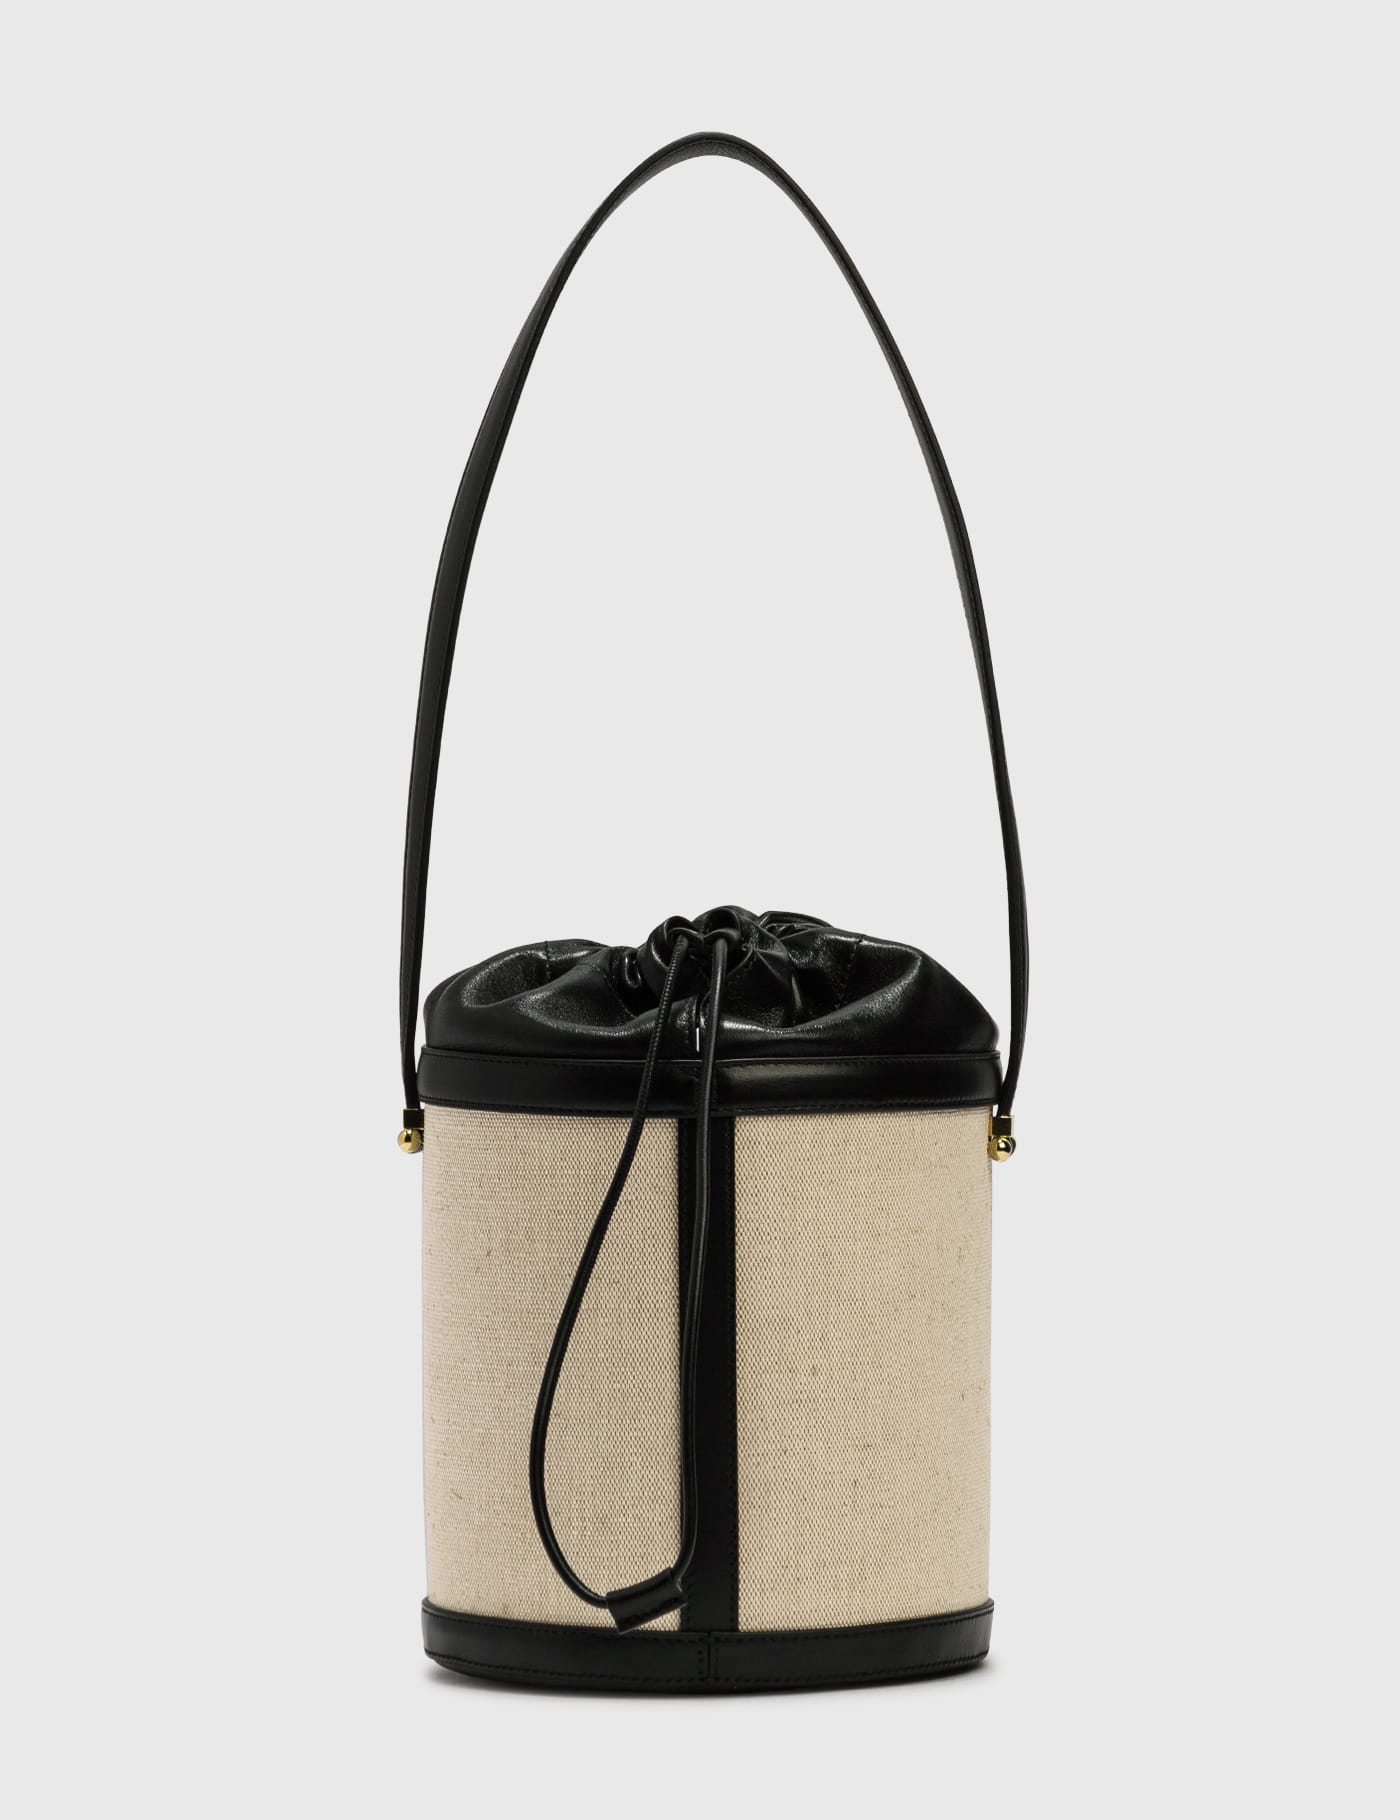 Jil Sander - Taos Bucket Bag | HBX - Globally Curated Fashion and Lifestyle  by Hypebeast